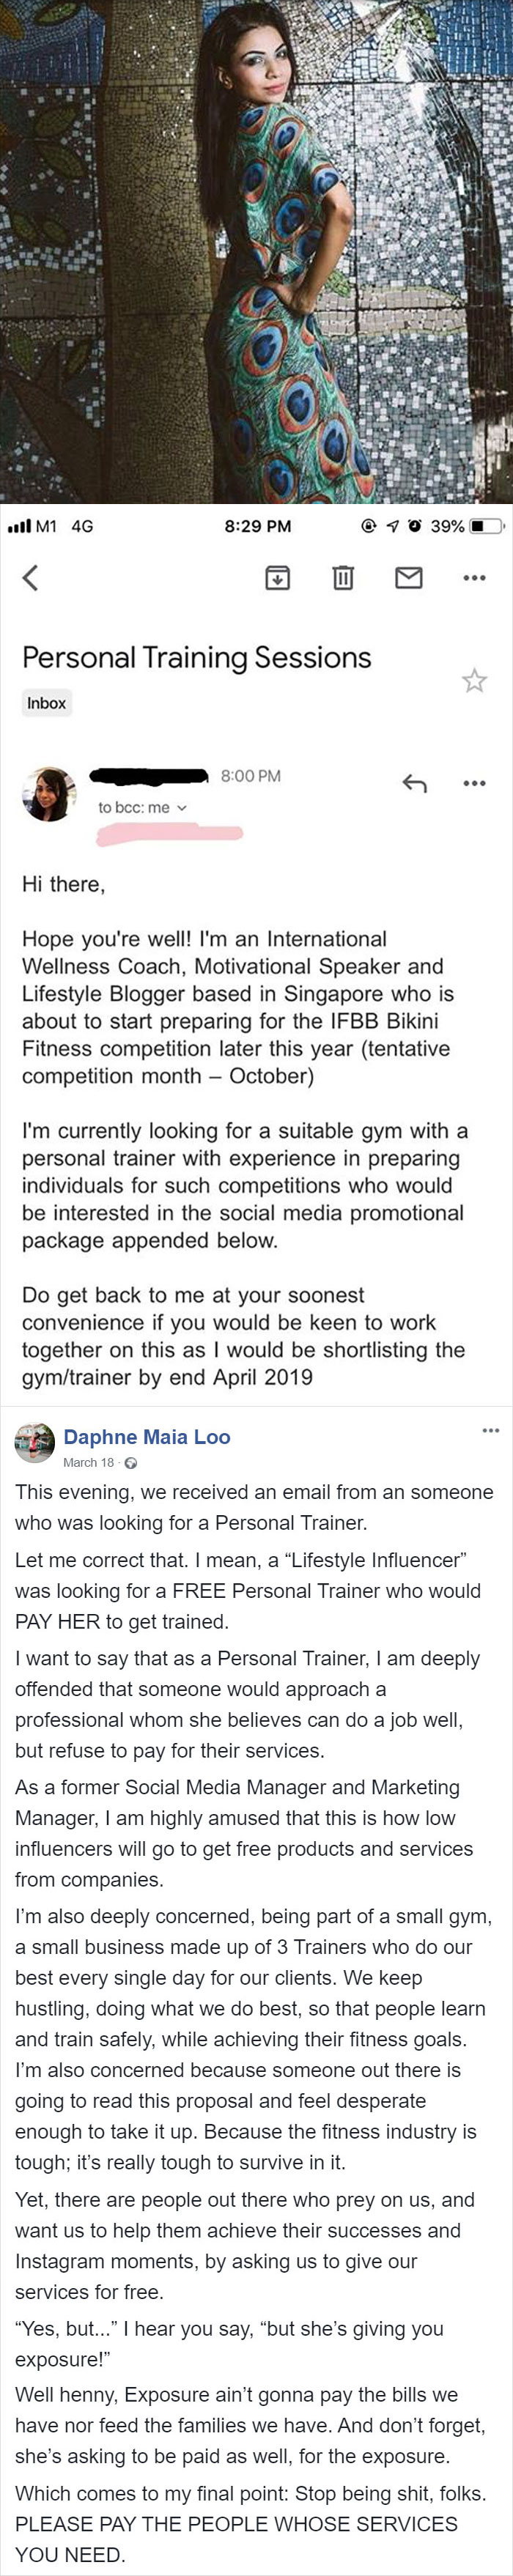 This Influencer Was Looking For A Personal Trainer That Would Pay Her For The 'Incredible' Opportunity Of Training Her